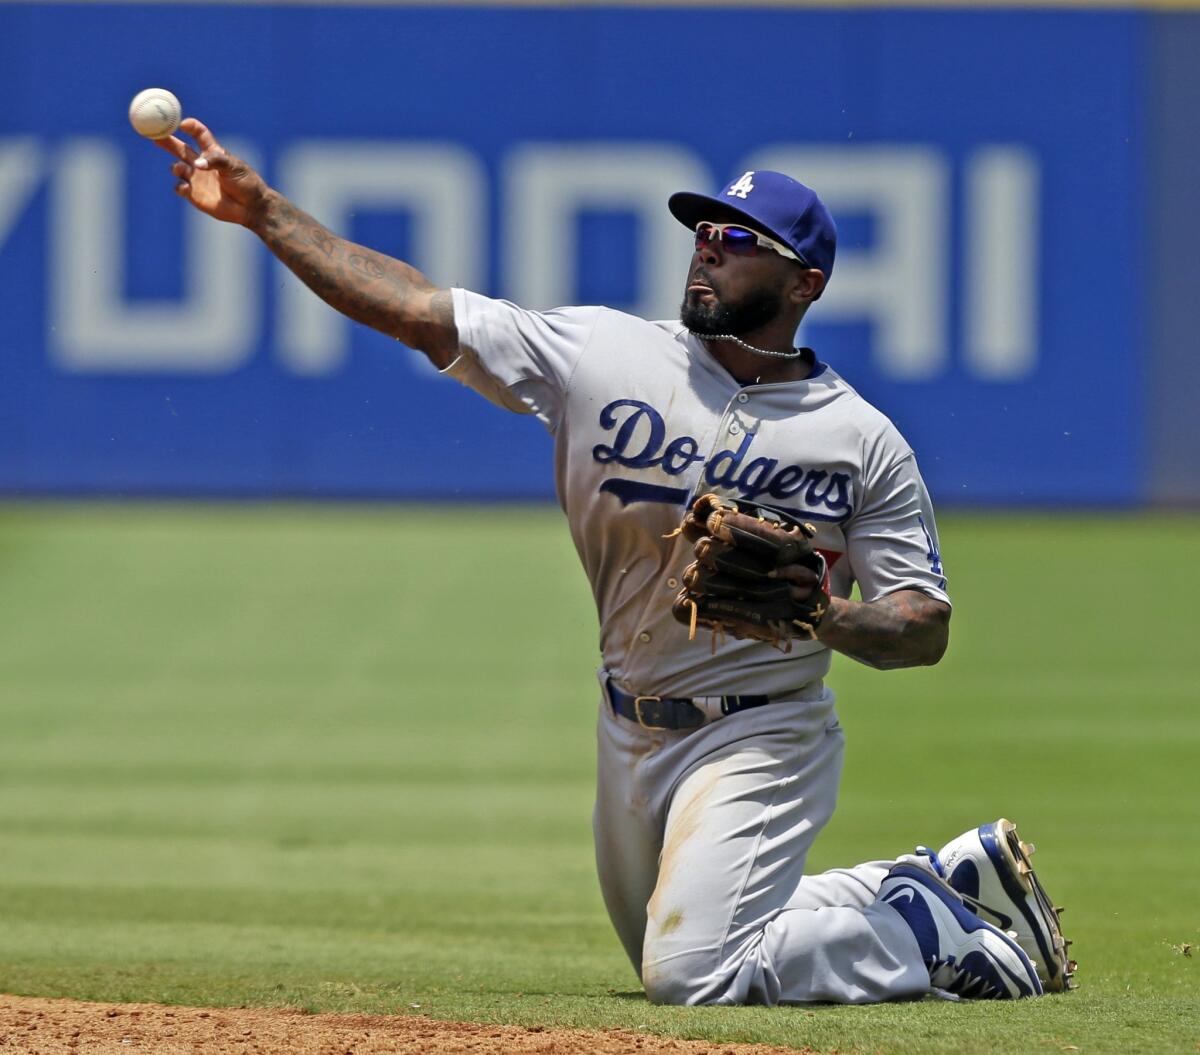 Dodgers second baseman Howie Kendrick throws to first after fielding a ground ball against the Atlanta Braves on Wednesday.